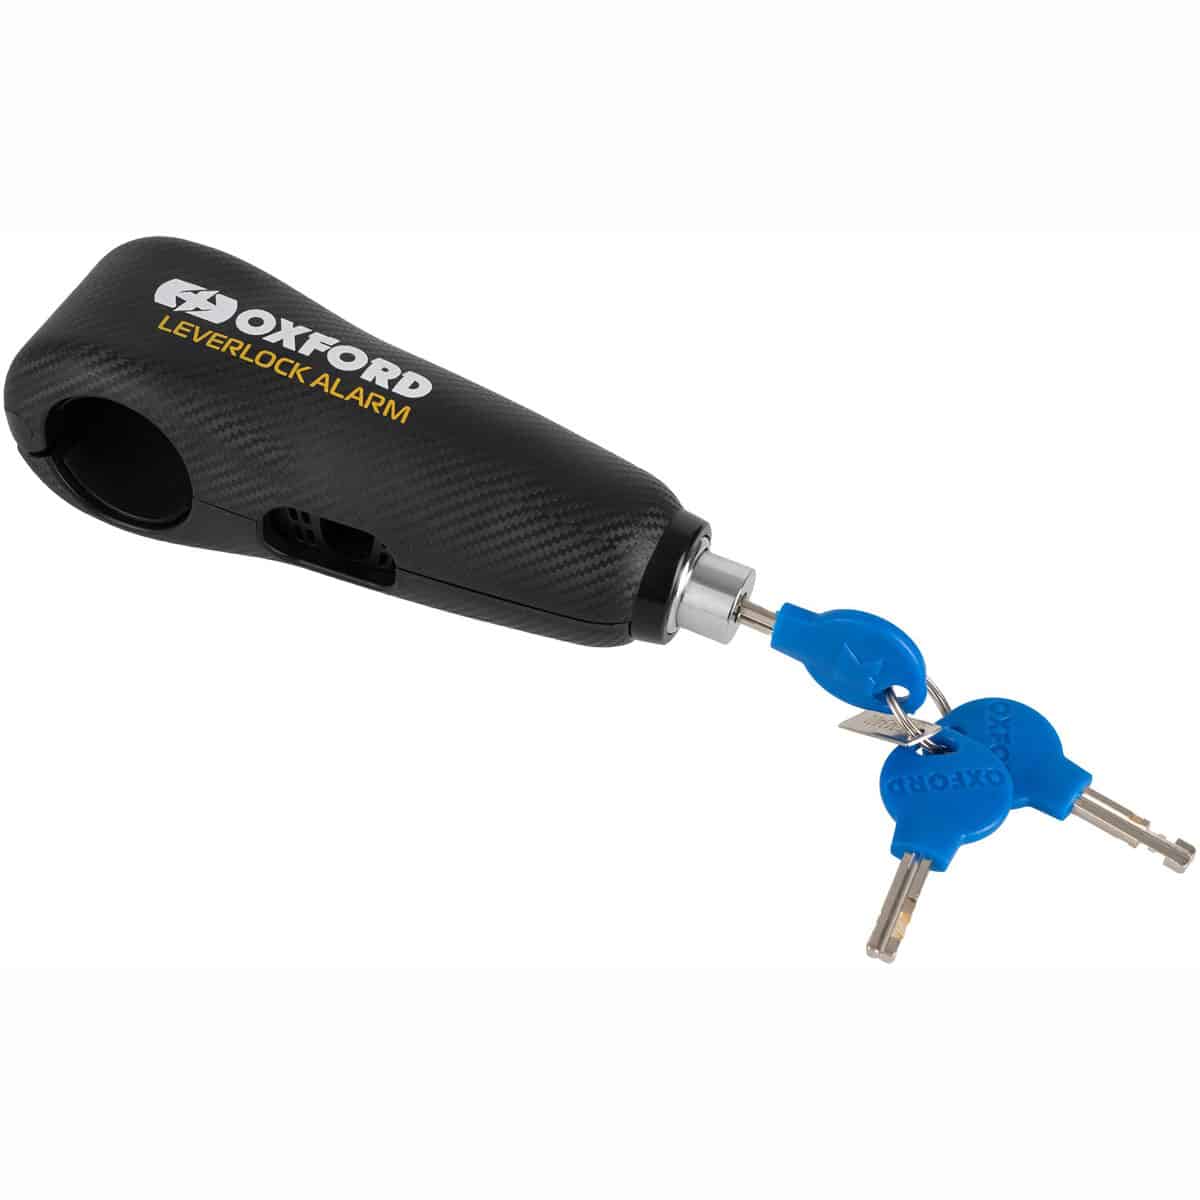 The Oxford LeverLock Alarm Motorcycle Throttle and Brake Security Lock is an easy-to-use, highly visible and easy to install theft deterrent for all scooters, motorcycles and ATVs